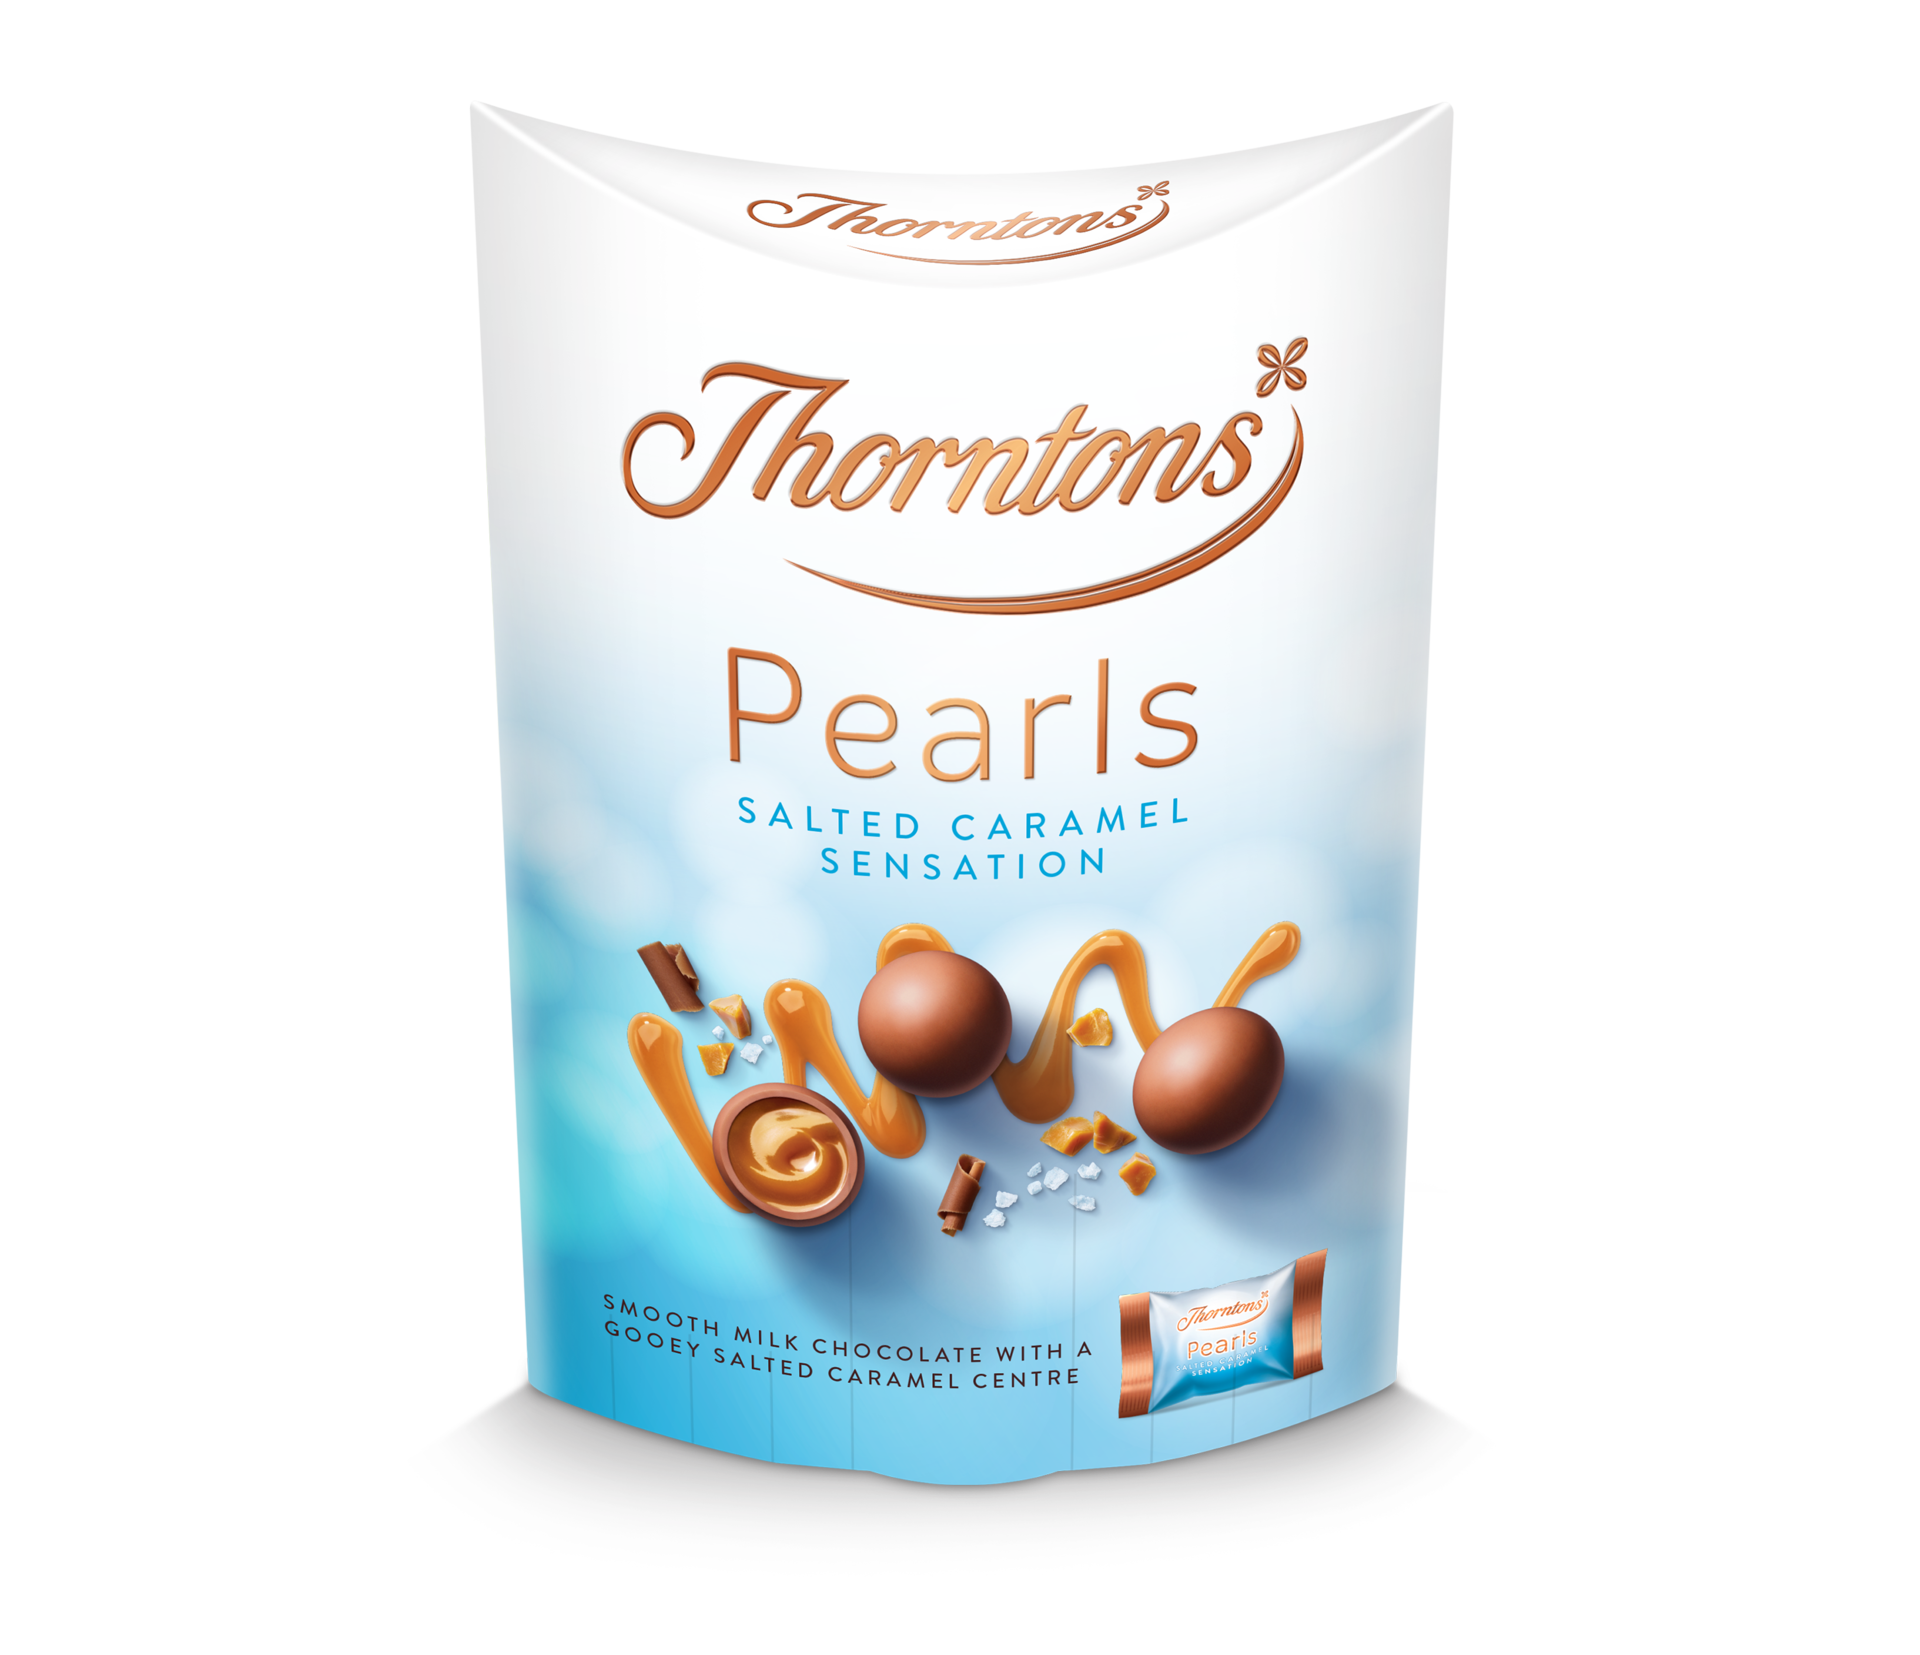 https://www.thorntons.com/medias/sys_master/images/hcc/hdc/9060963287070/77226875_main/77226875-main.png?resize=CMSFlexComponent